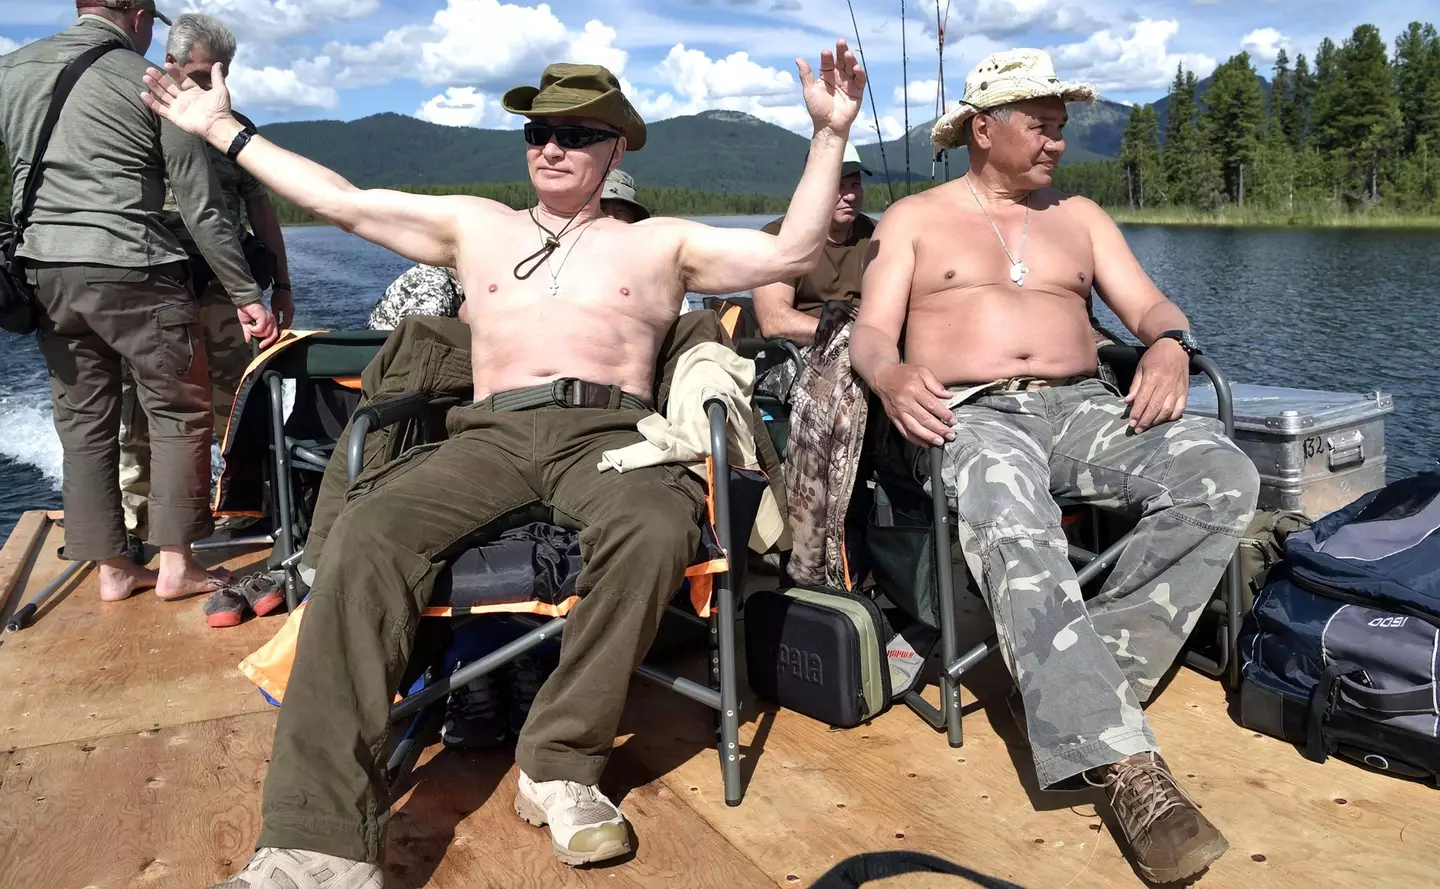 "Hands up if you love being on holiday!" - Putin, we assume.